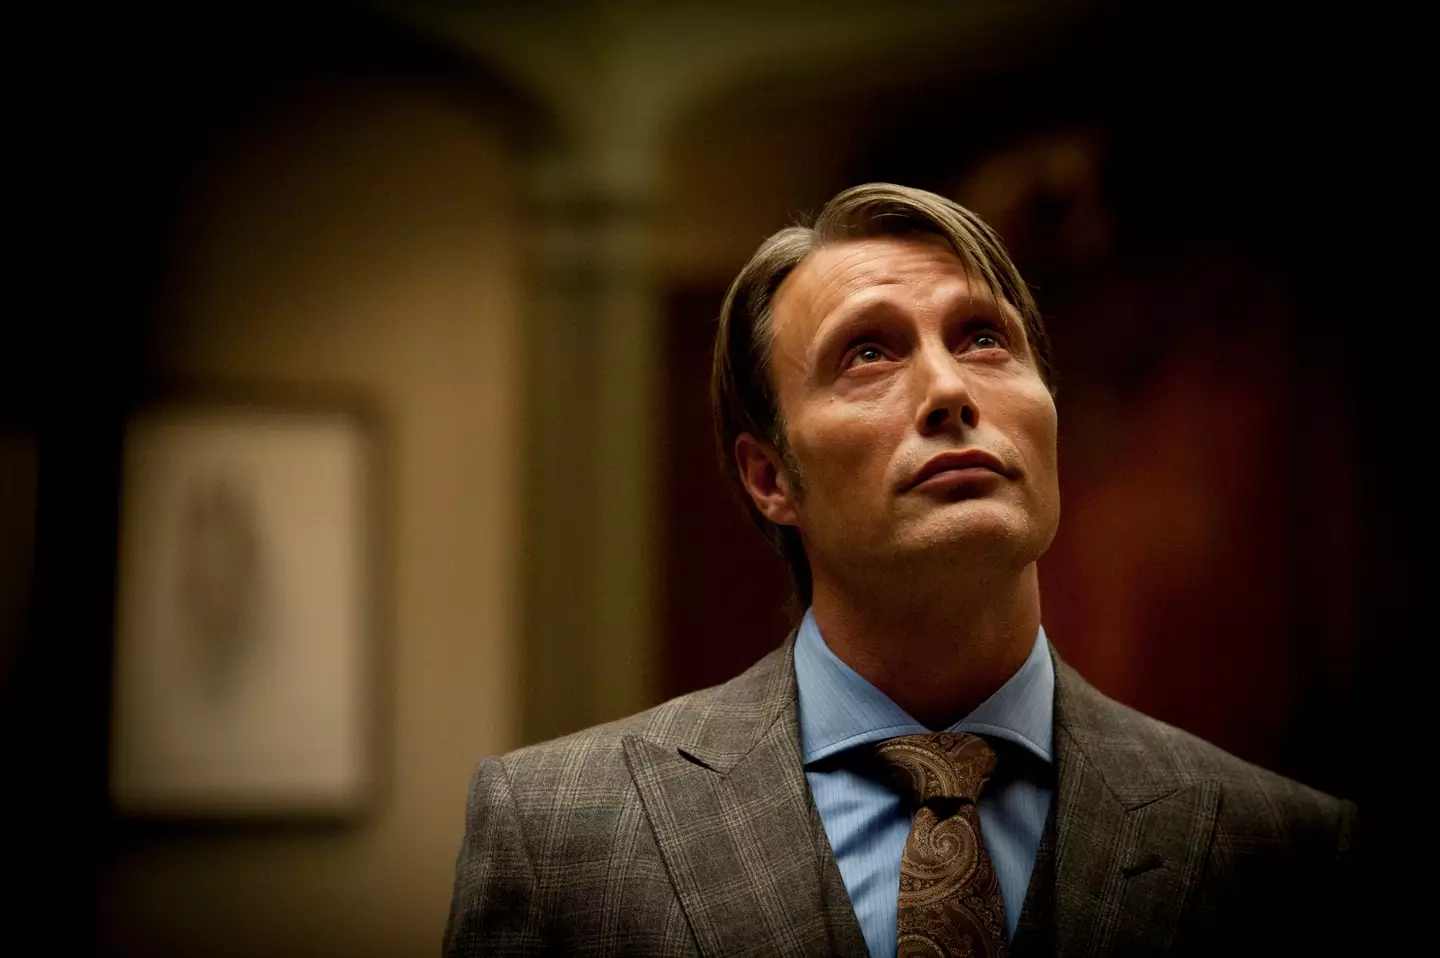 Mads Mikkelsen wants to play Hannibal Lecter again.